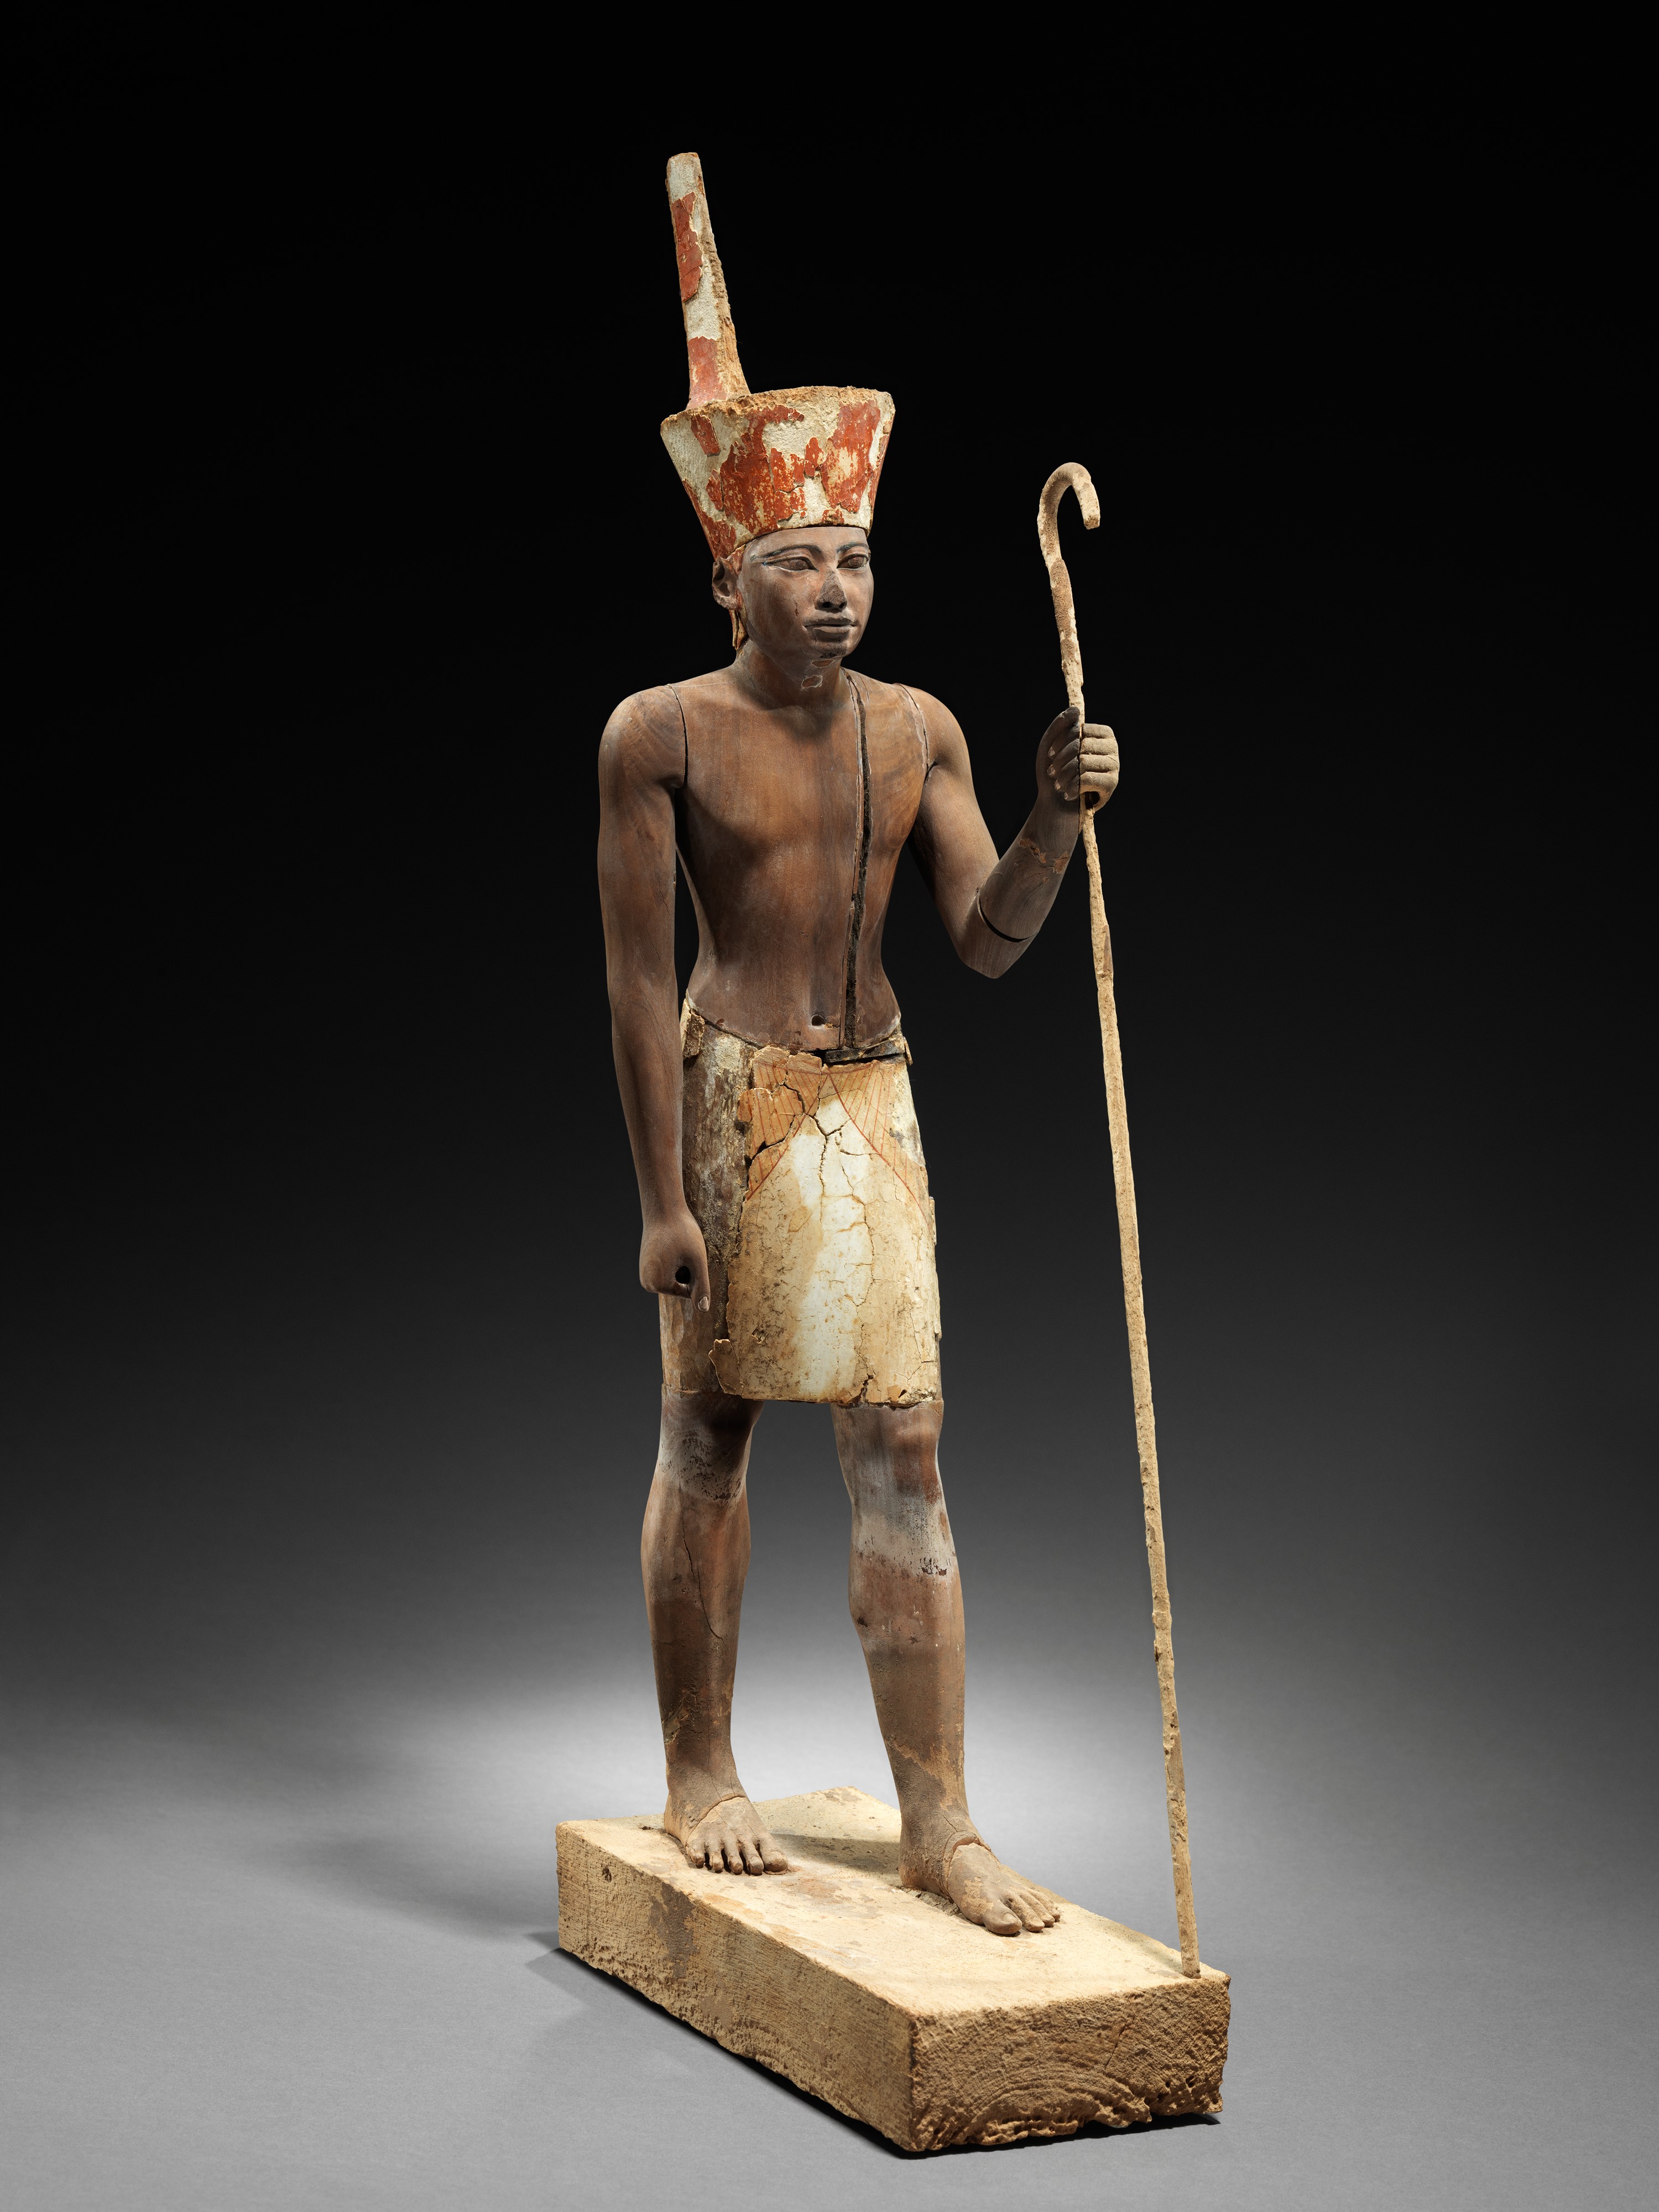 Funerary Guardian Figure, ca. 1919–1878 B.C. Egyptian, Middle Kingdom Cedar wood, plaster, paint ; H. 57.6 cm (22 11/16 in.); W. 11 cm (4 5/16 in.); D. 26 cm (10 1/4 in.) The Metropolitan Museum of Art, New York, Rogers Fund and Edward S. Harkness Gift, 1914 (14.3.17) http://www.metmuseum.org/Collections/search-the-collections/543864